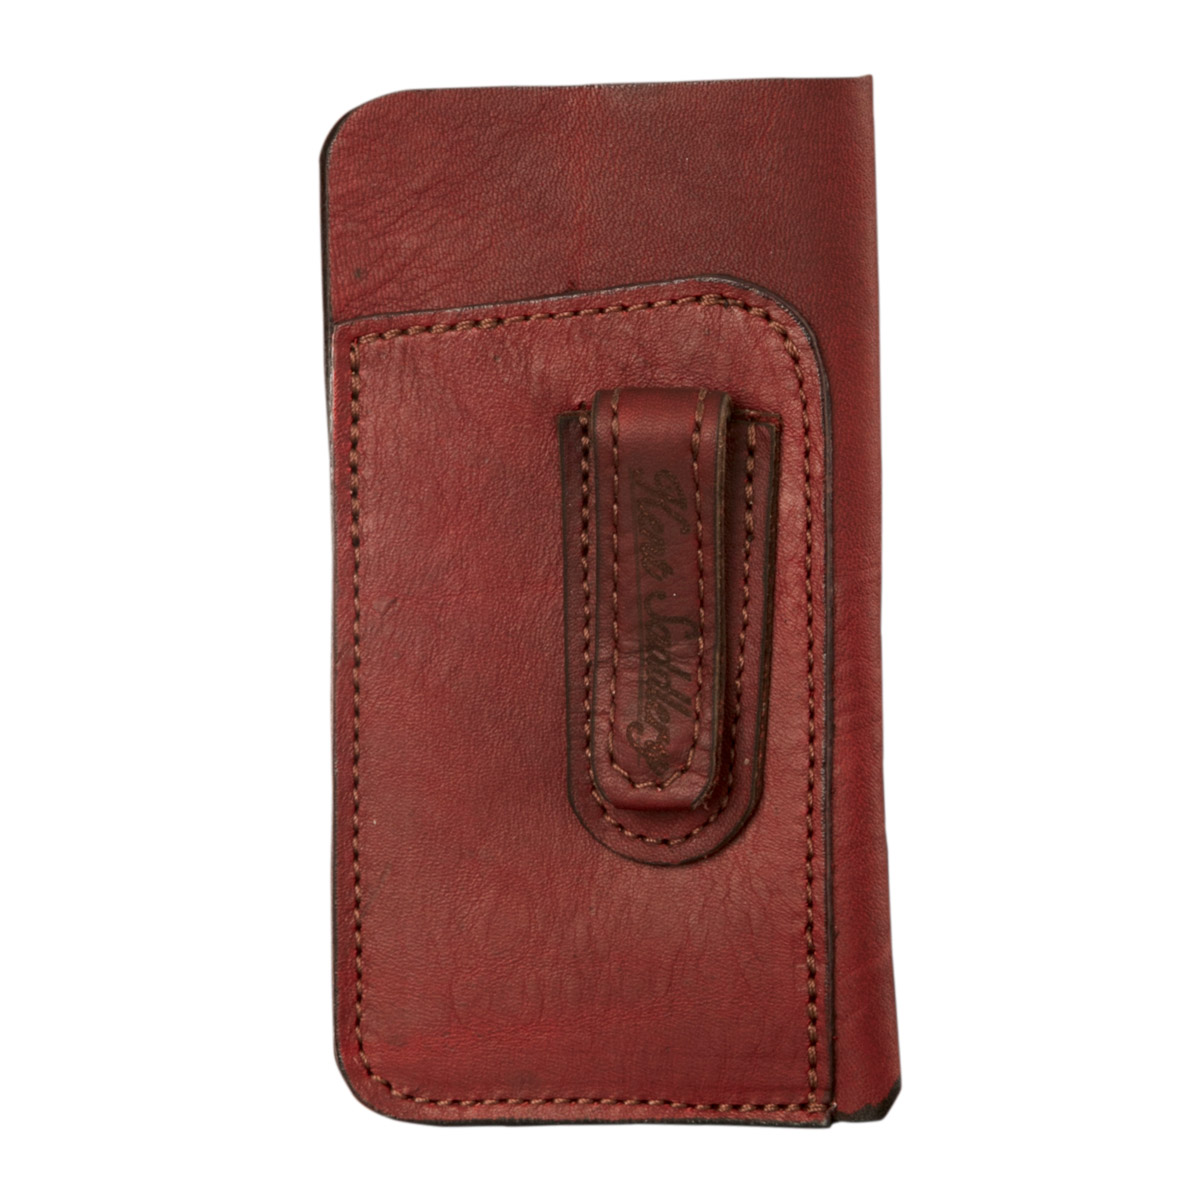 Glasses Case, Soft Leather with Pen Holder and Pocket Clip 3